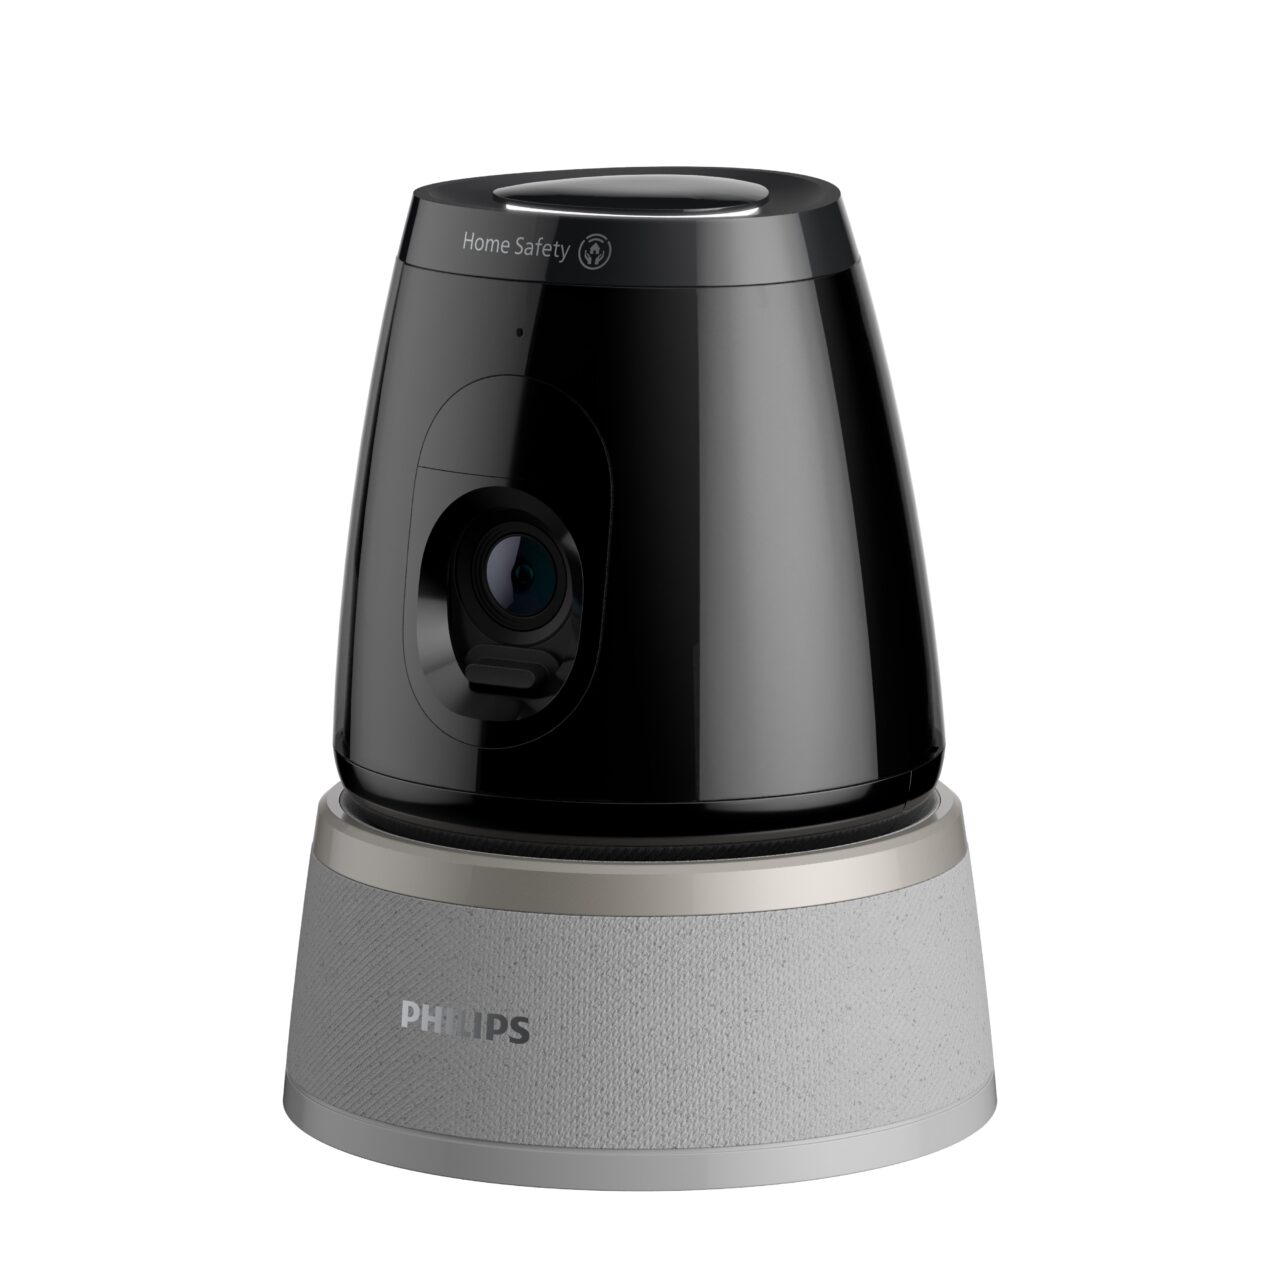 Philips Home Safety 5000 Series: Revolutionizing Home Security with New Technology